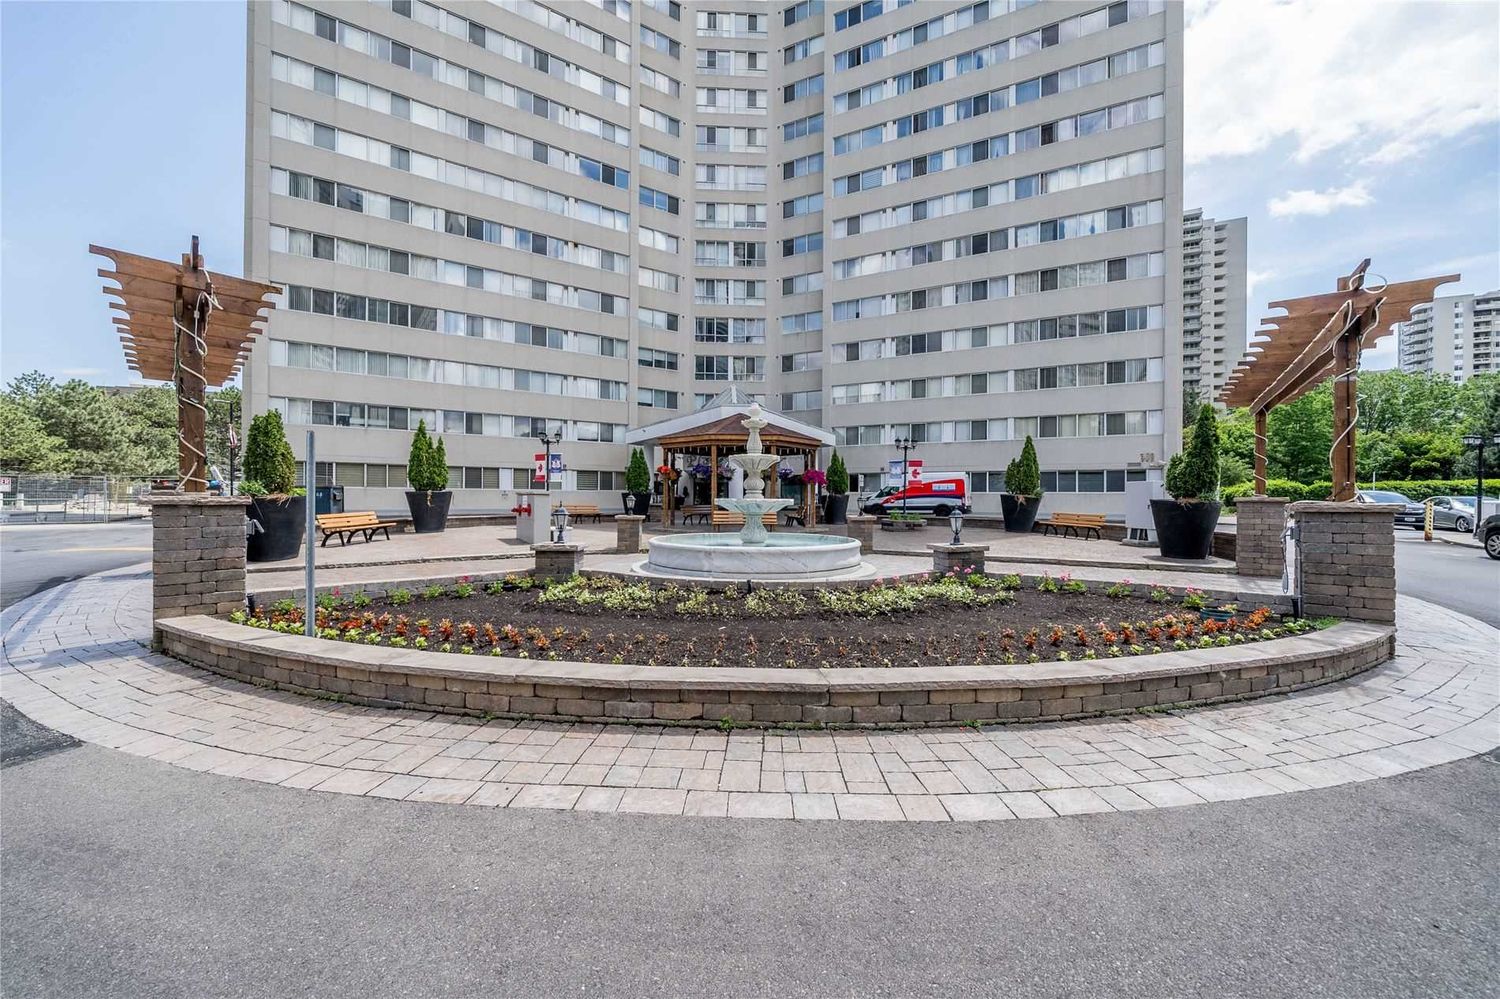 3695 Kaneff Crescent. Place Royale Condo is located in  Mississauga, Toronto - image #3 of 3